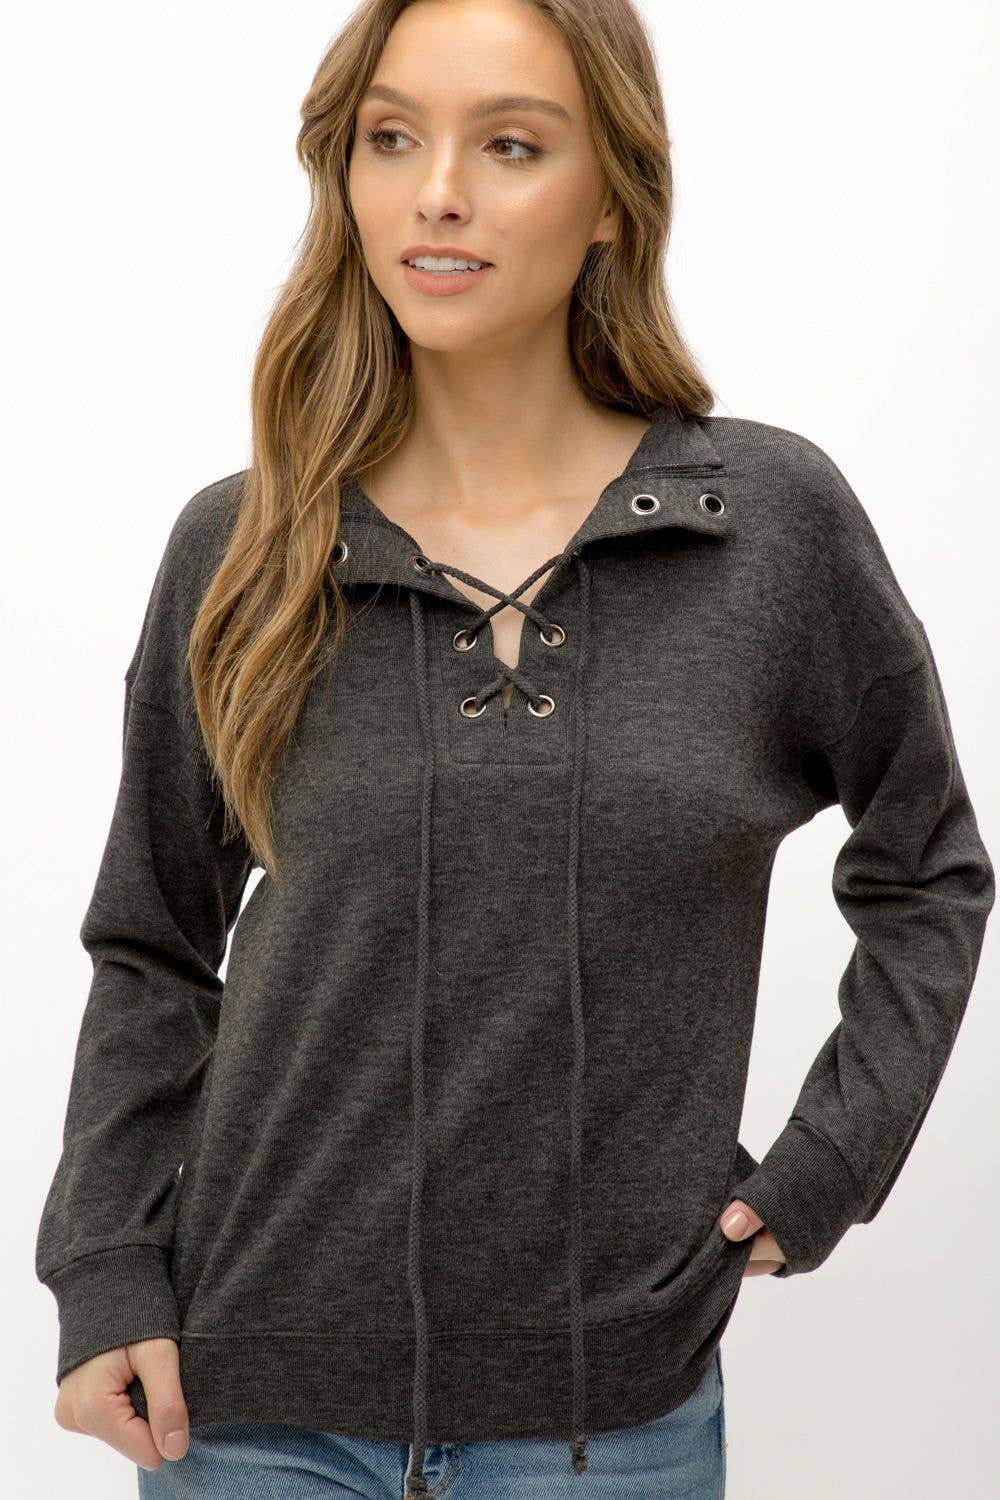 Mystree - Lace Up Top / Charcoal